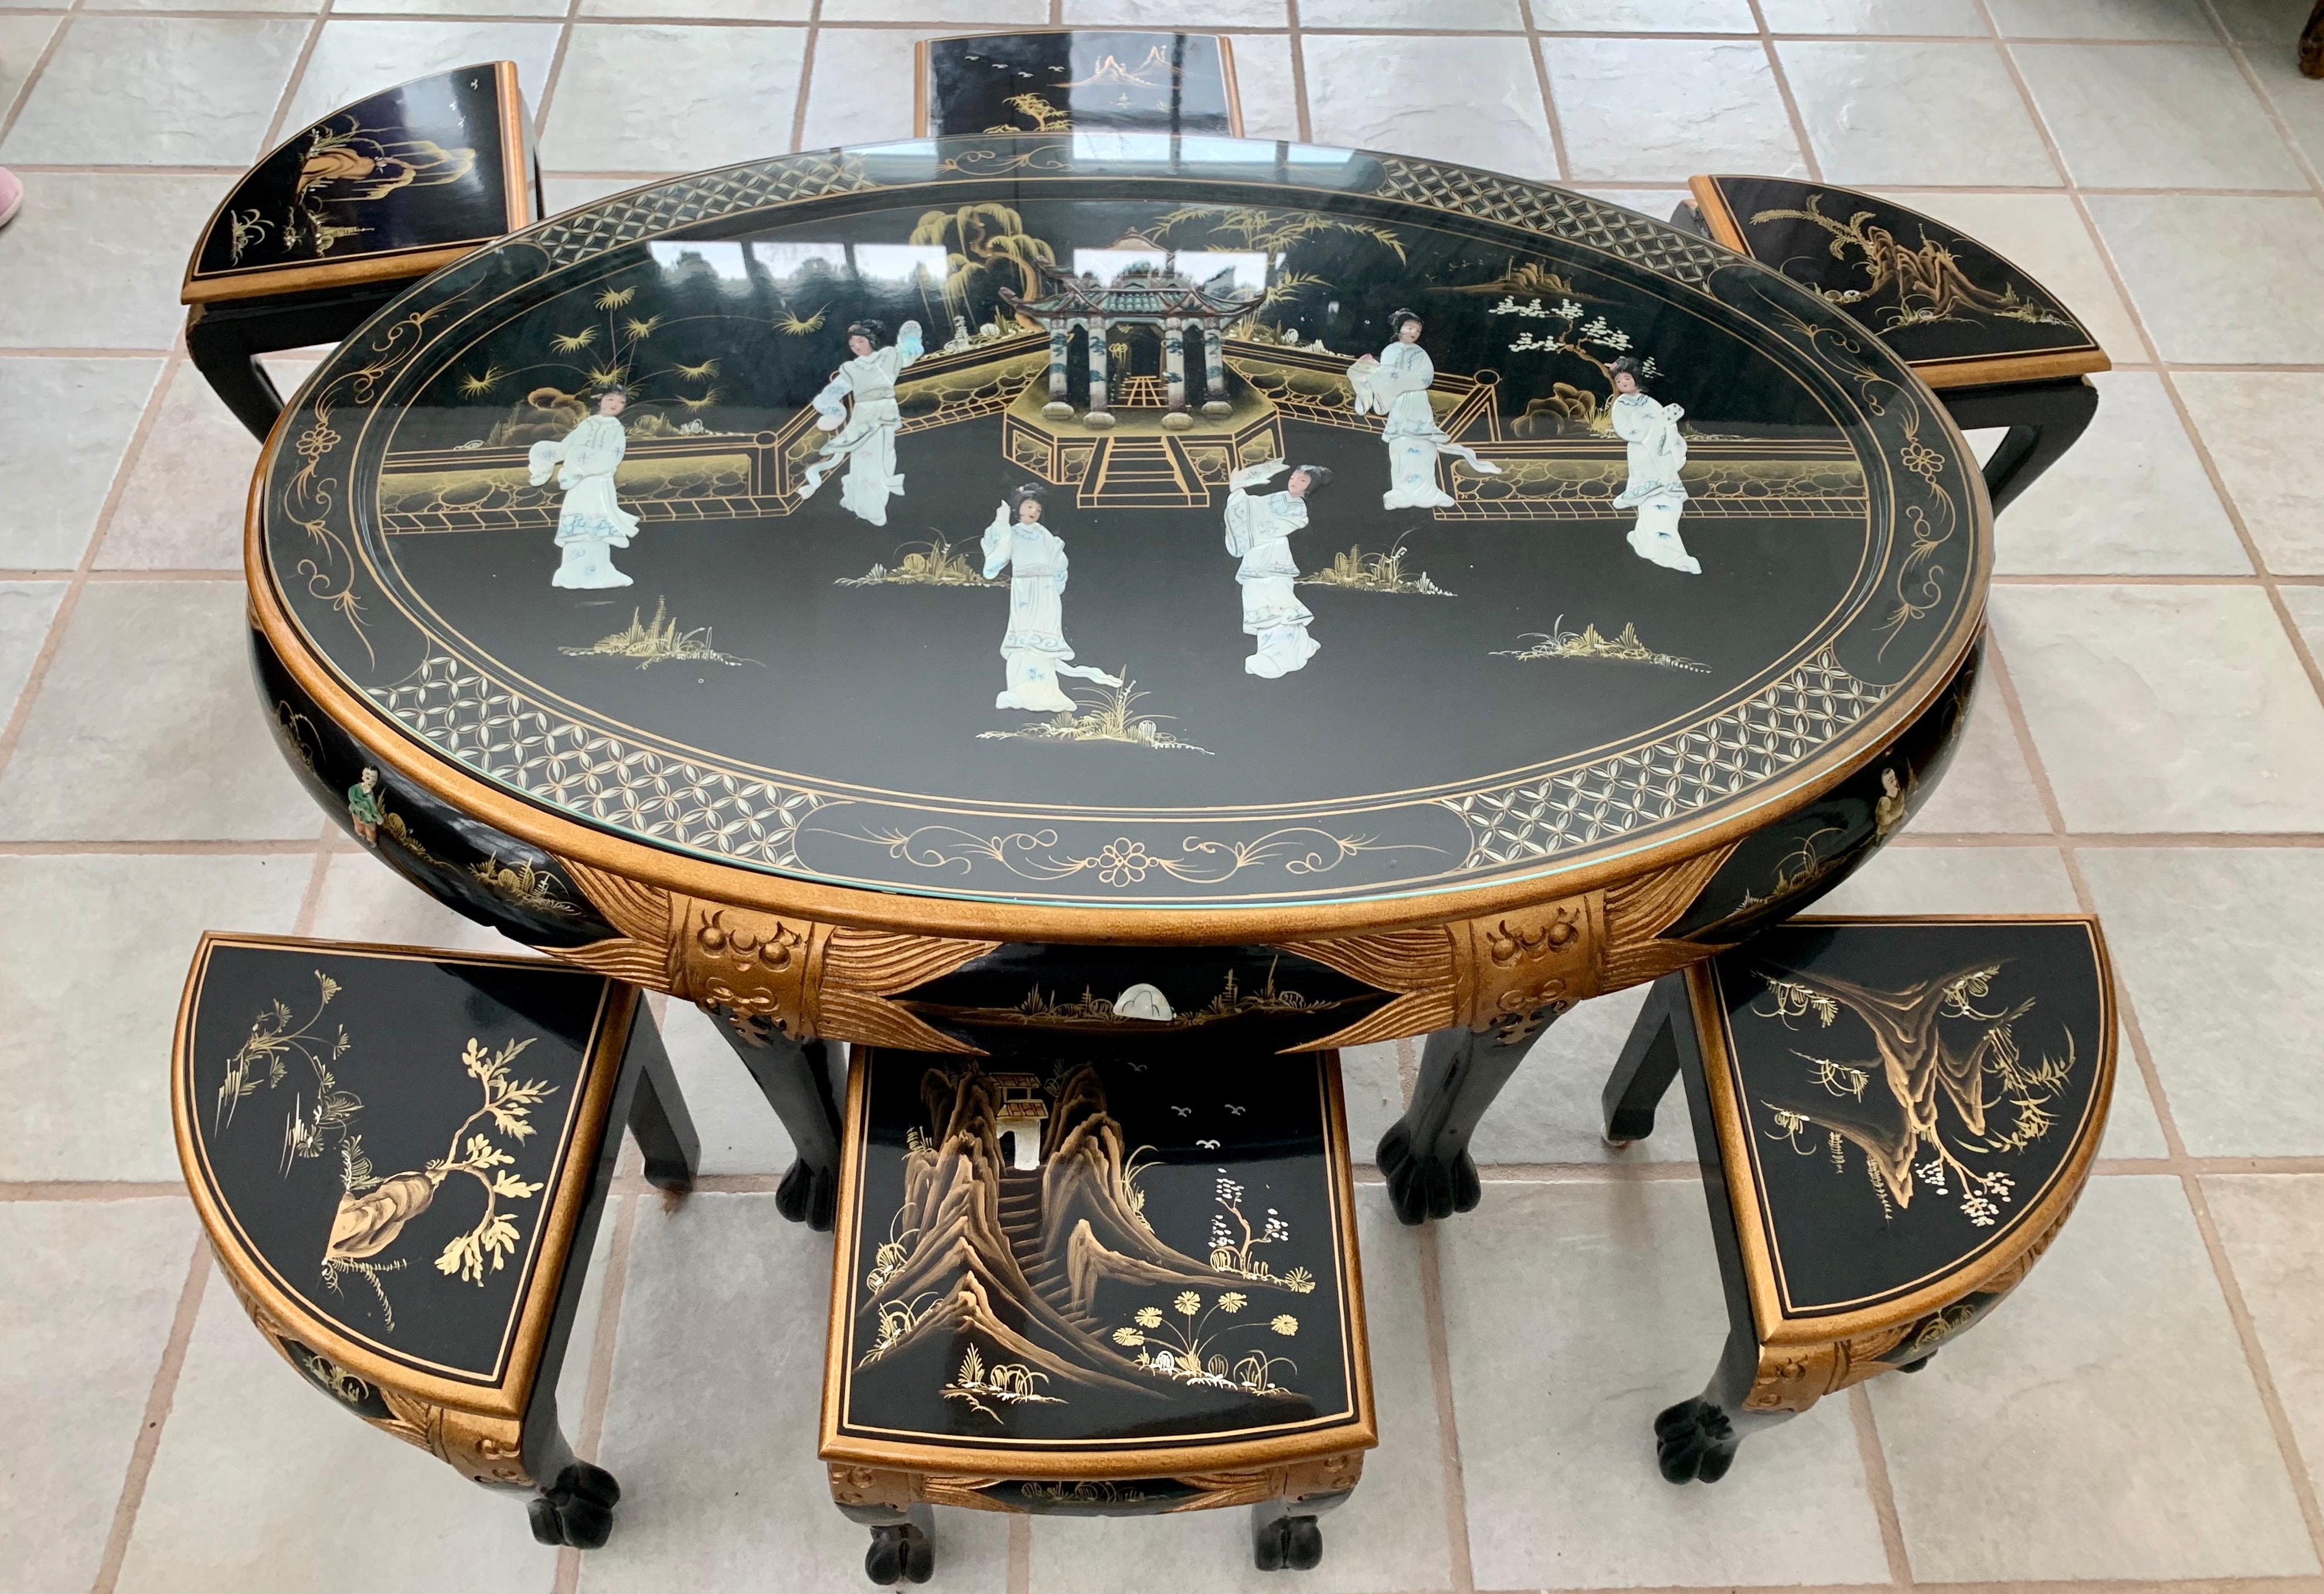 Chinese black lacquer and gold tea table set with 6 triangular stools. Each piece is hand-crafted from sturdy Elm wood and finished with a rich black lacquer. Top of table is a scenery of Chinese women around a temple and is Hand-carved from mother